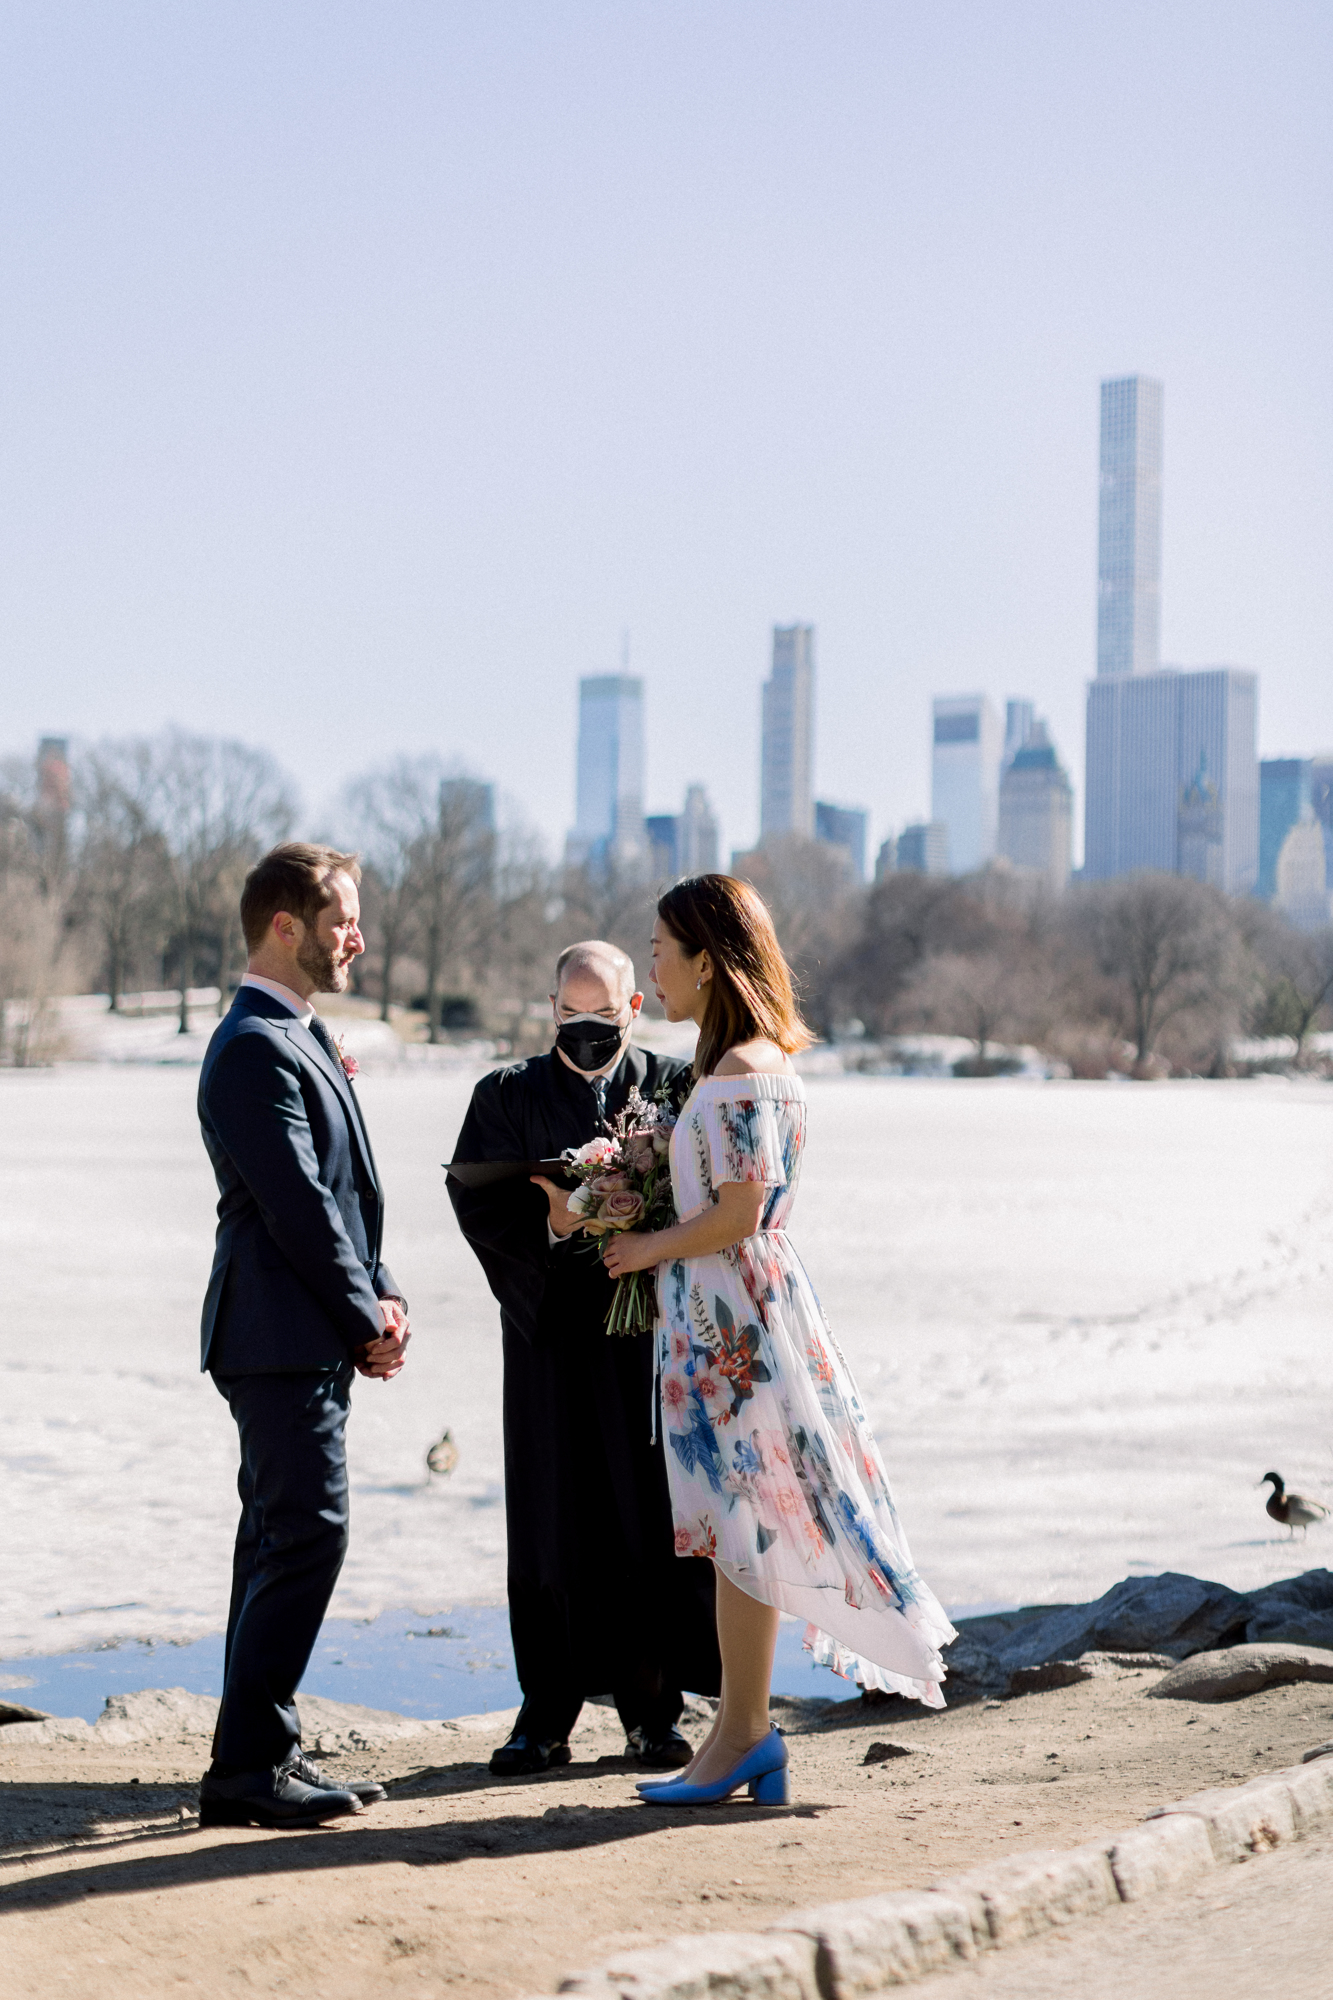 Graceful Central Park Wedding Photos in Wintery NYC